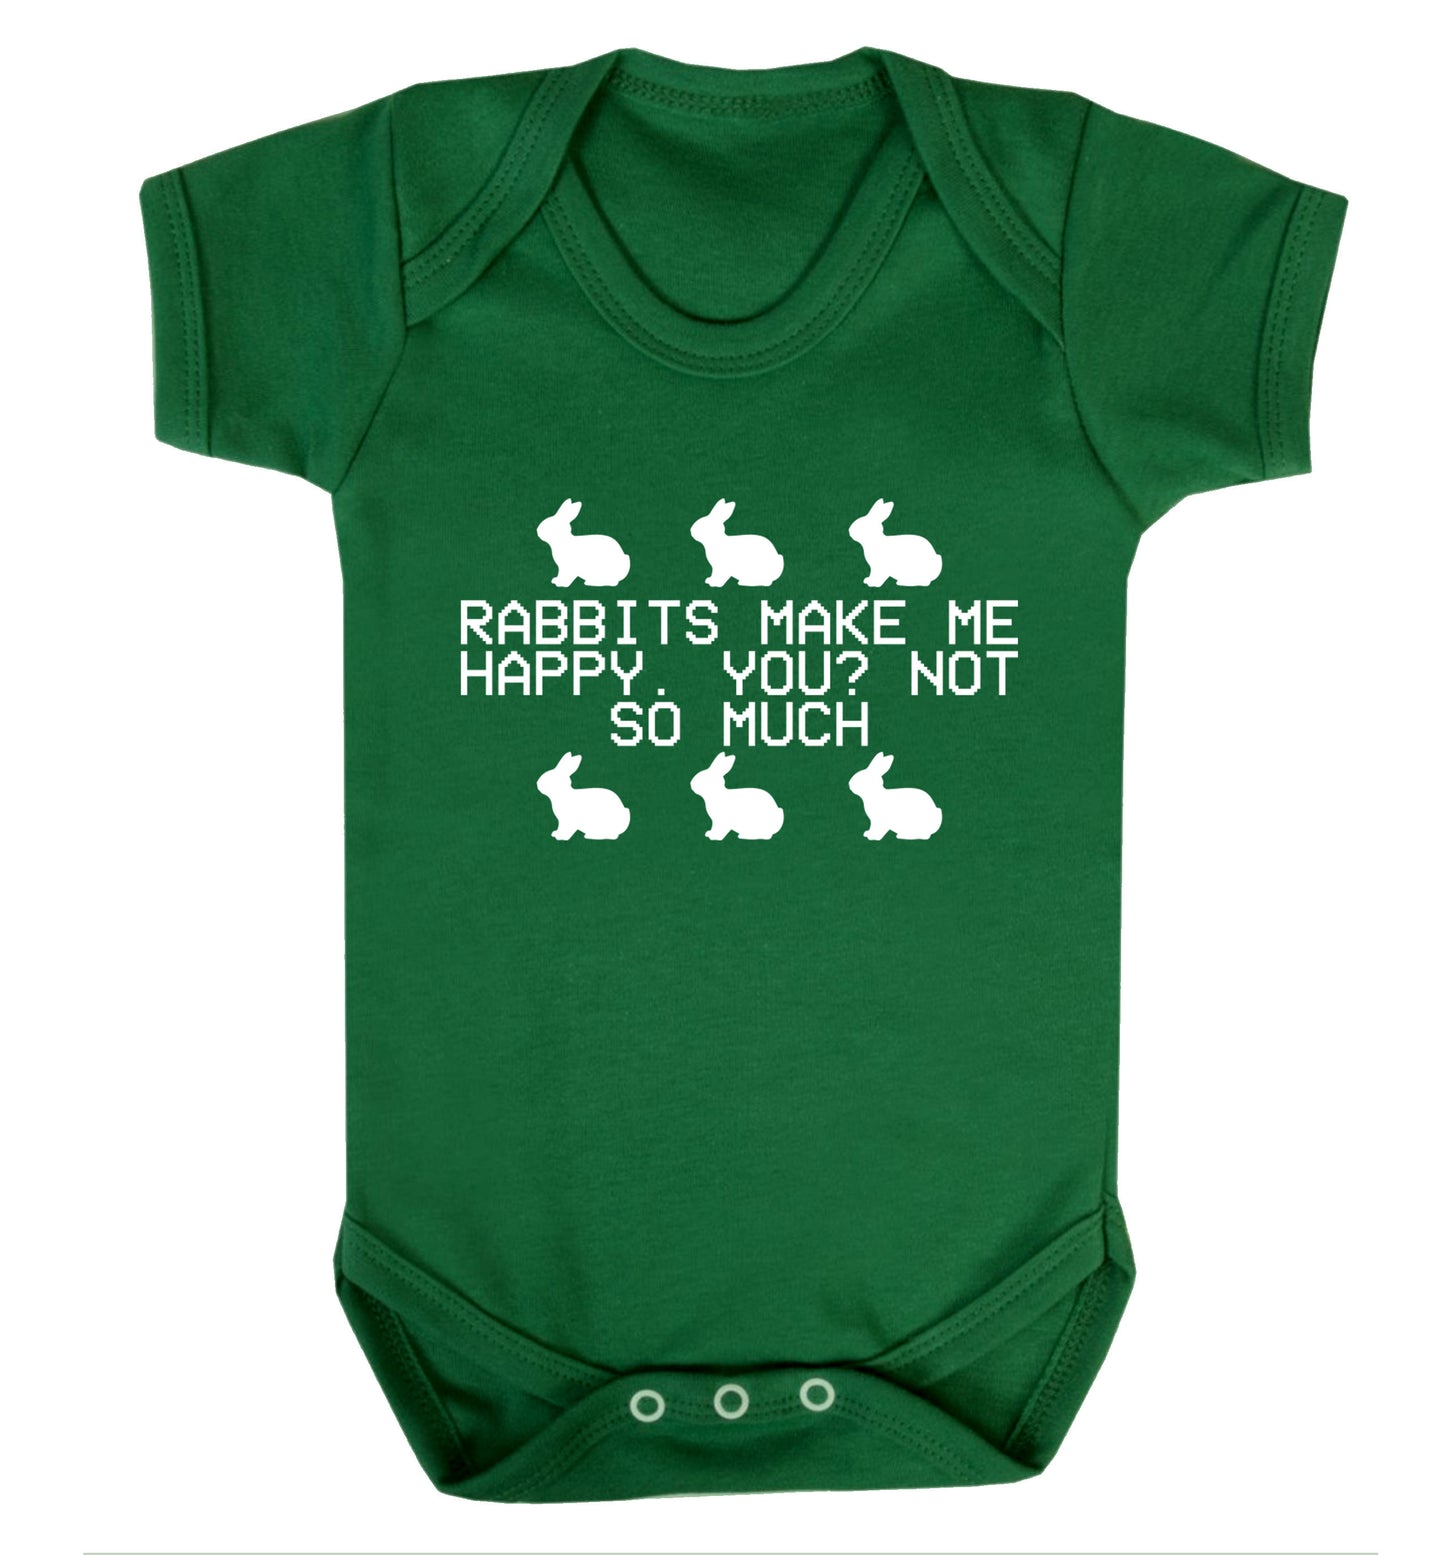 Rabbits make me happy, you not so much Baby Vest green 18-24 months